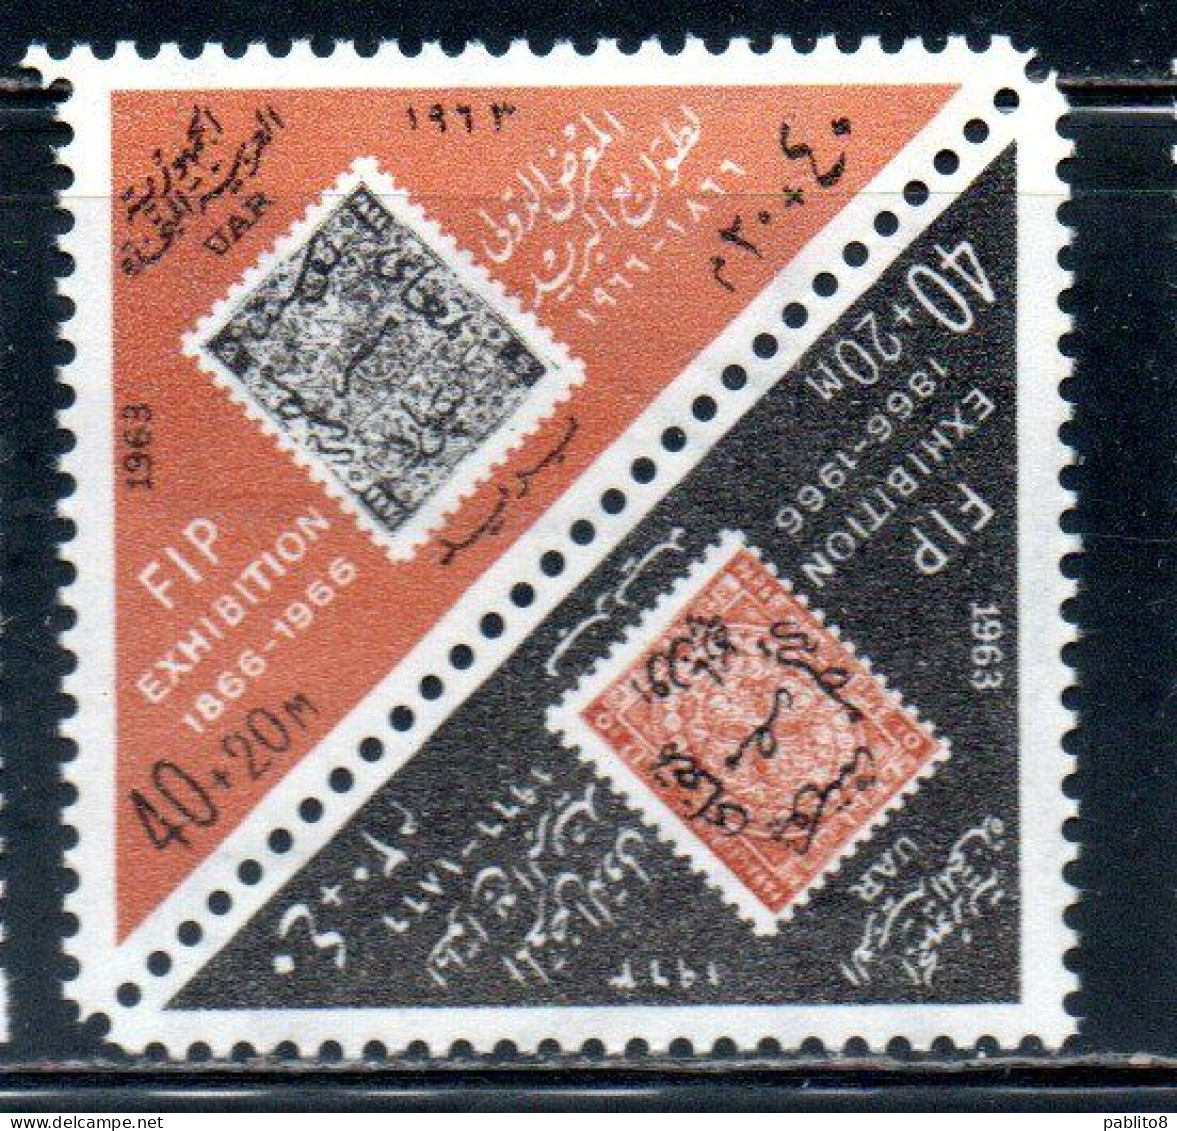 UAR EGYPT EGITTO 1963 POST DAY AND STAMP EXHIBITION 1966 OF THE FIP 40m + 20m MNH - Ongebruikt